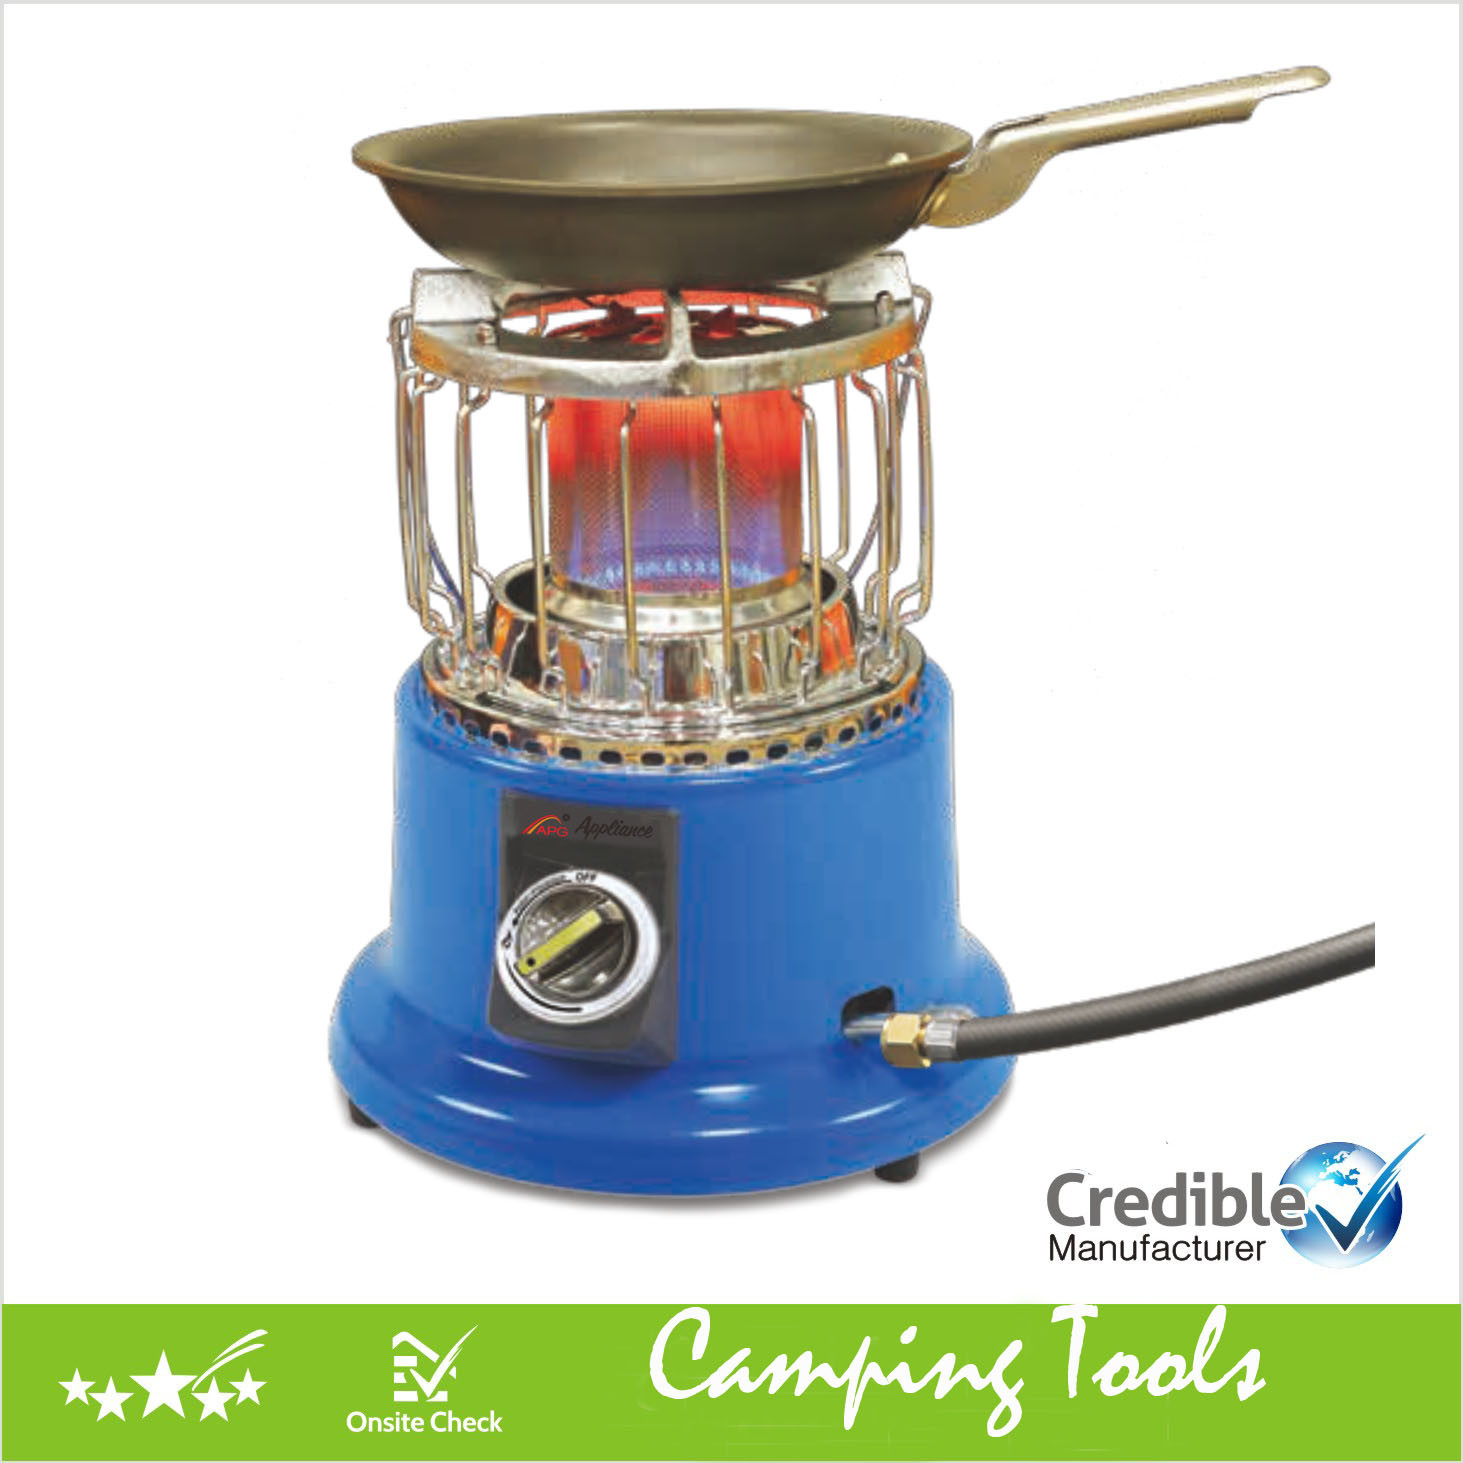 Portable 2-in-1 Camping Gas Cooker